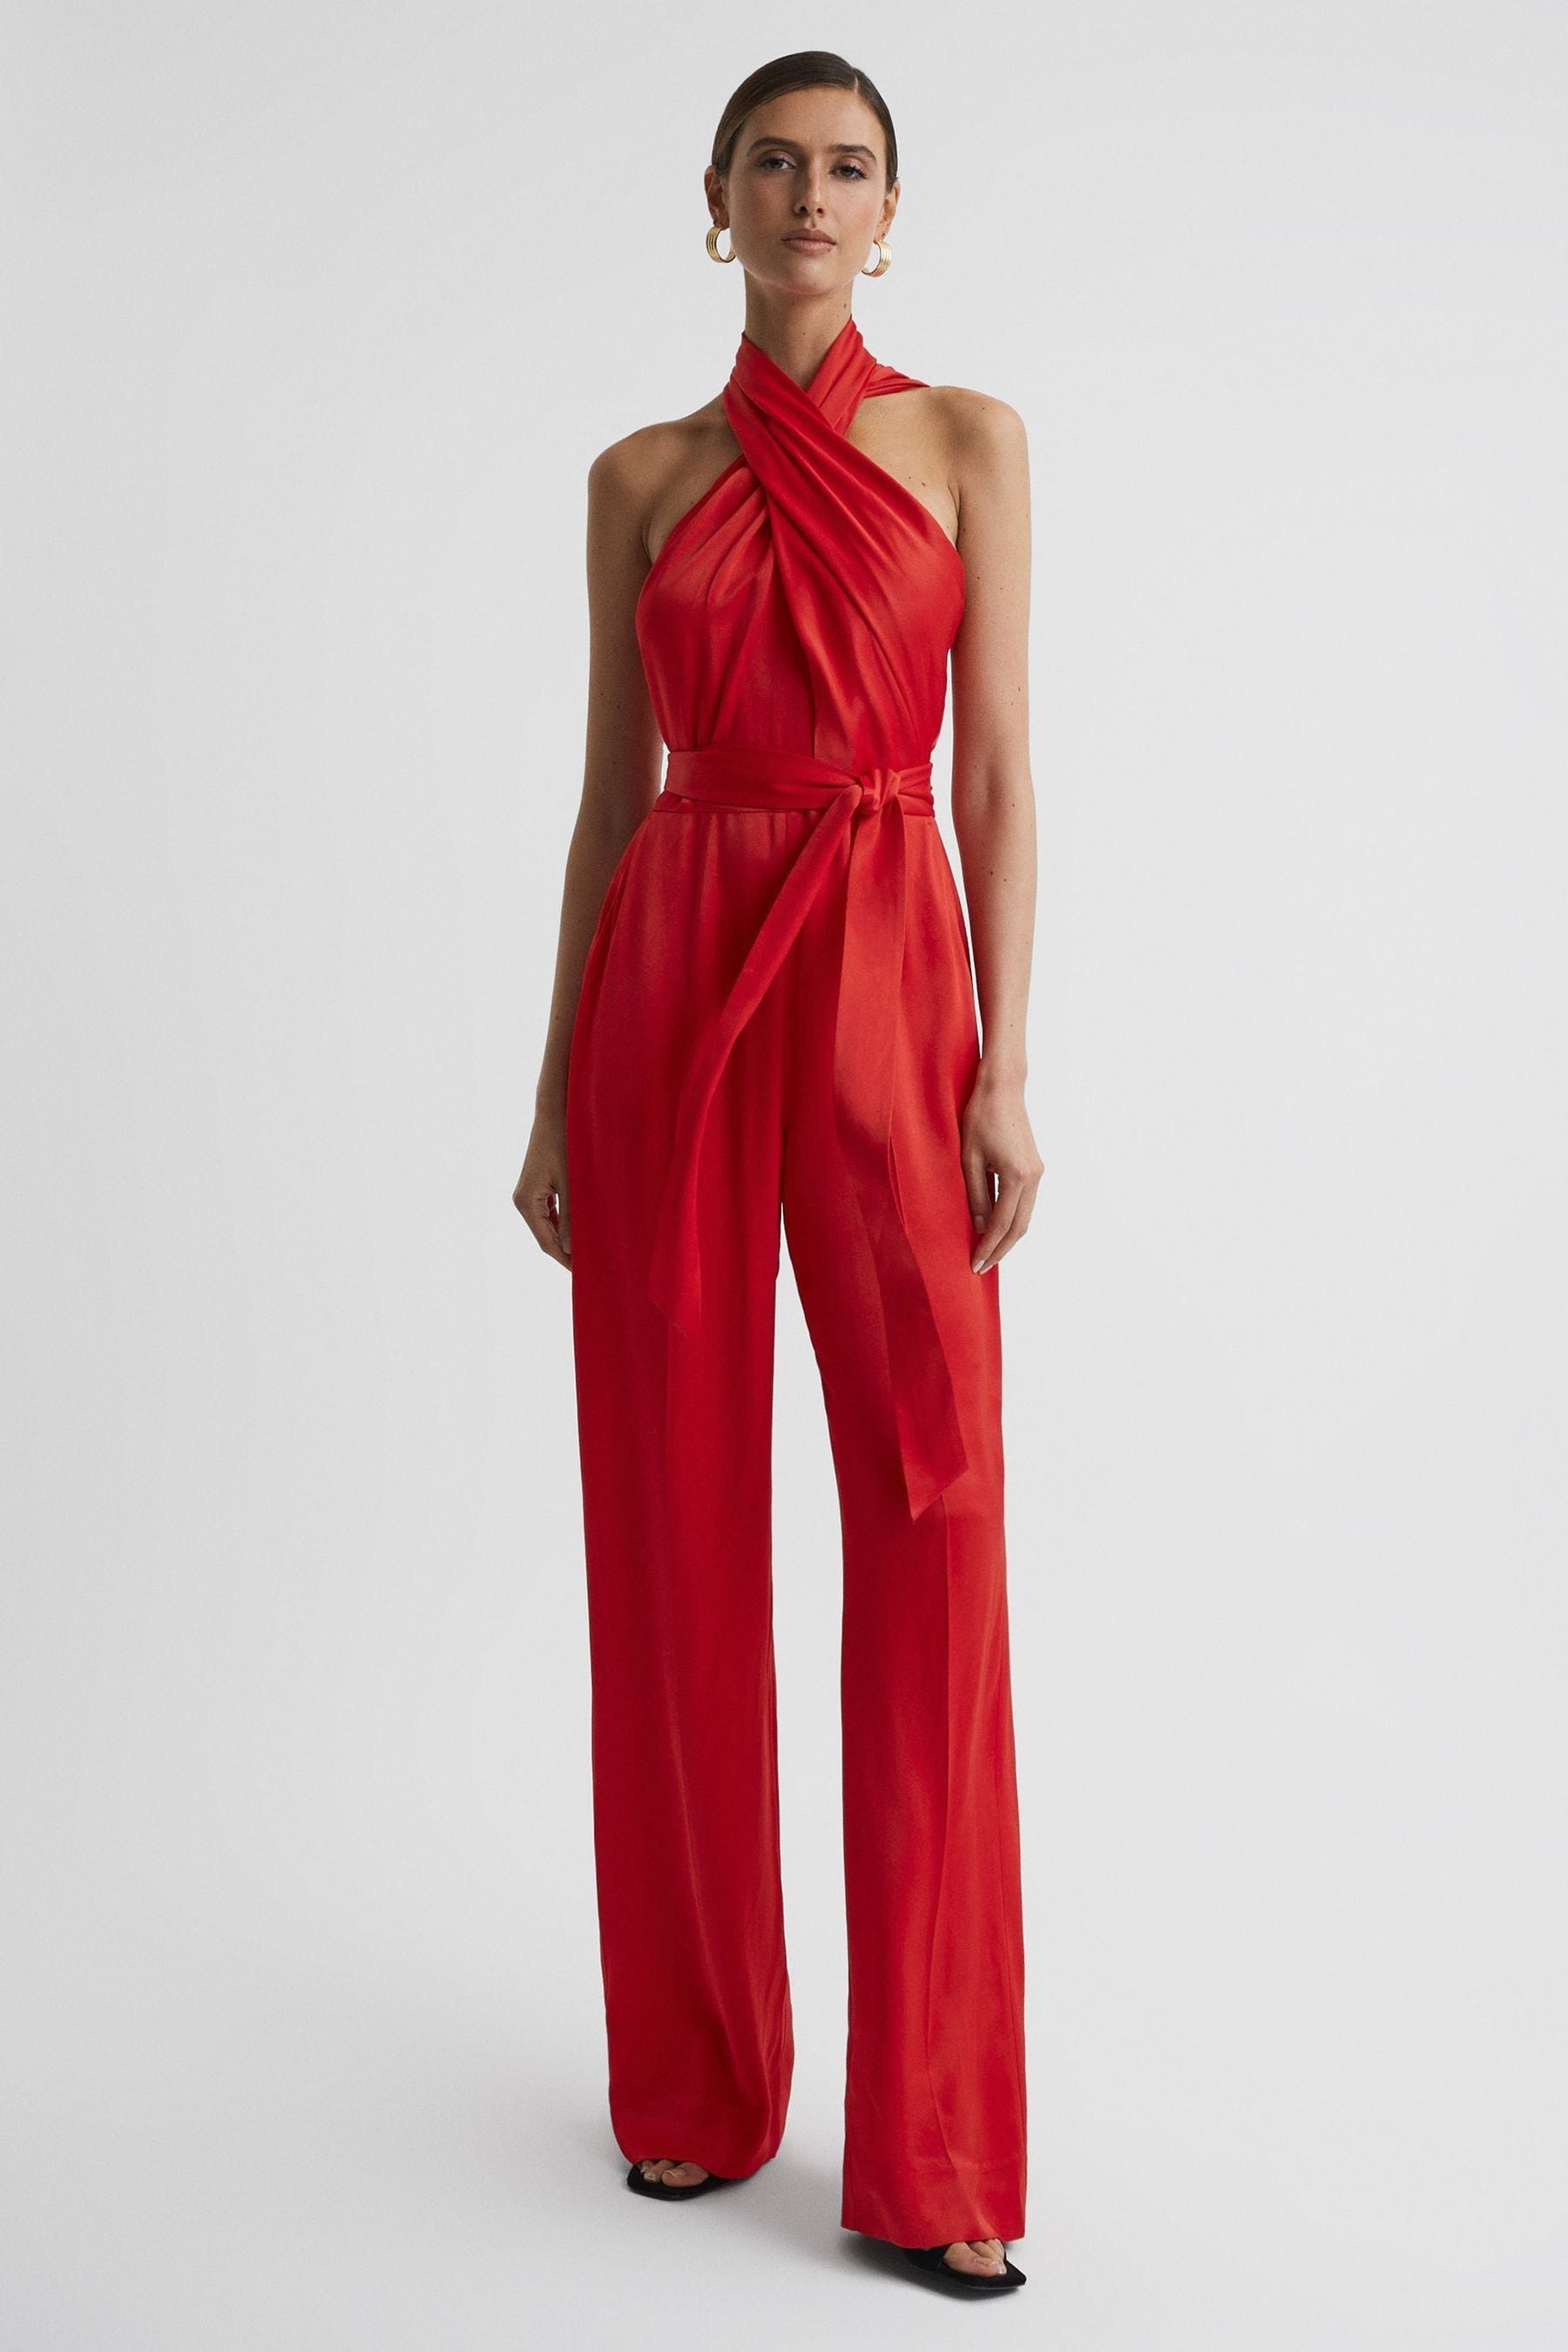 Reiss Jules - Red Satin Halter Neck Fitted Jumpsuit, Us 6